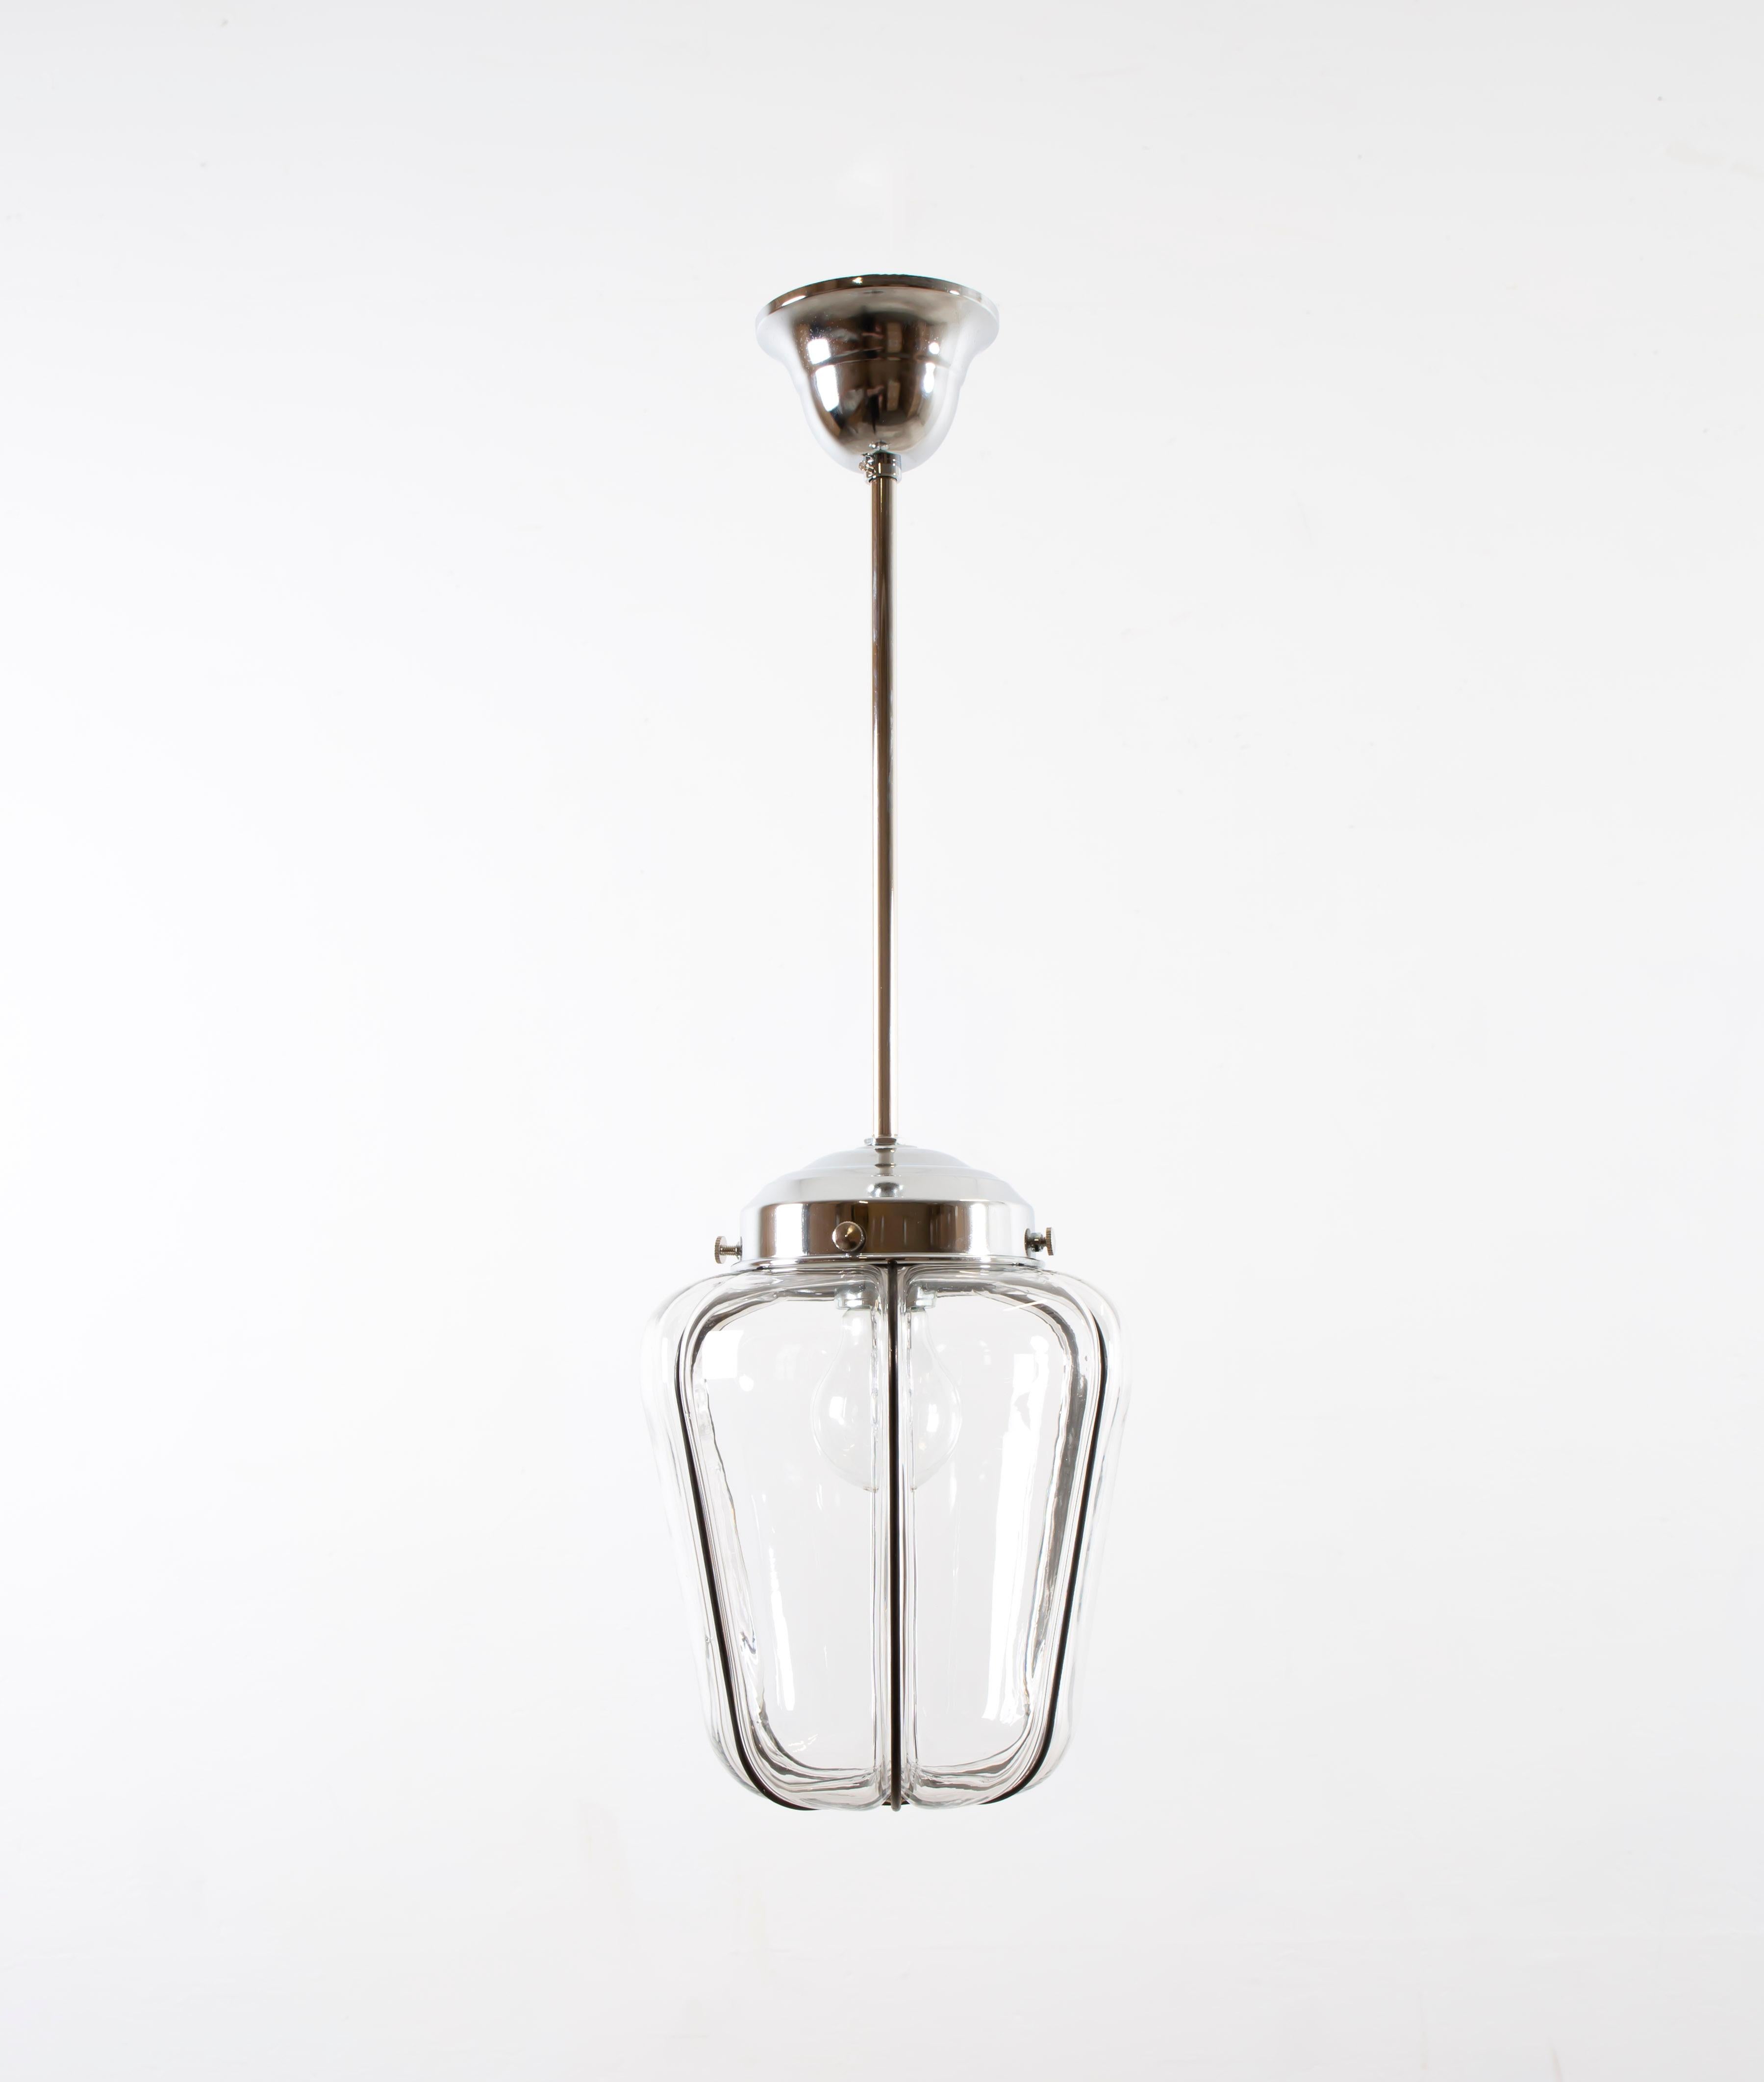 Decorative ceiling light with a clear glass shade on a steel wire frame and chrome stem. Most likely designed and made in Norway from circa first half of the 1950s. The lamp is fully working and in very good vintage condition. It is fitted with one